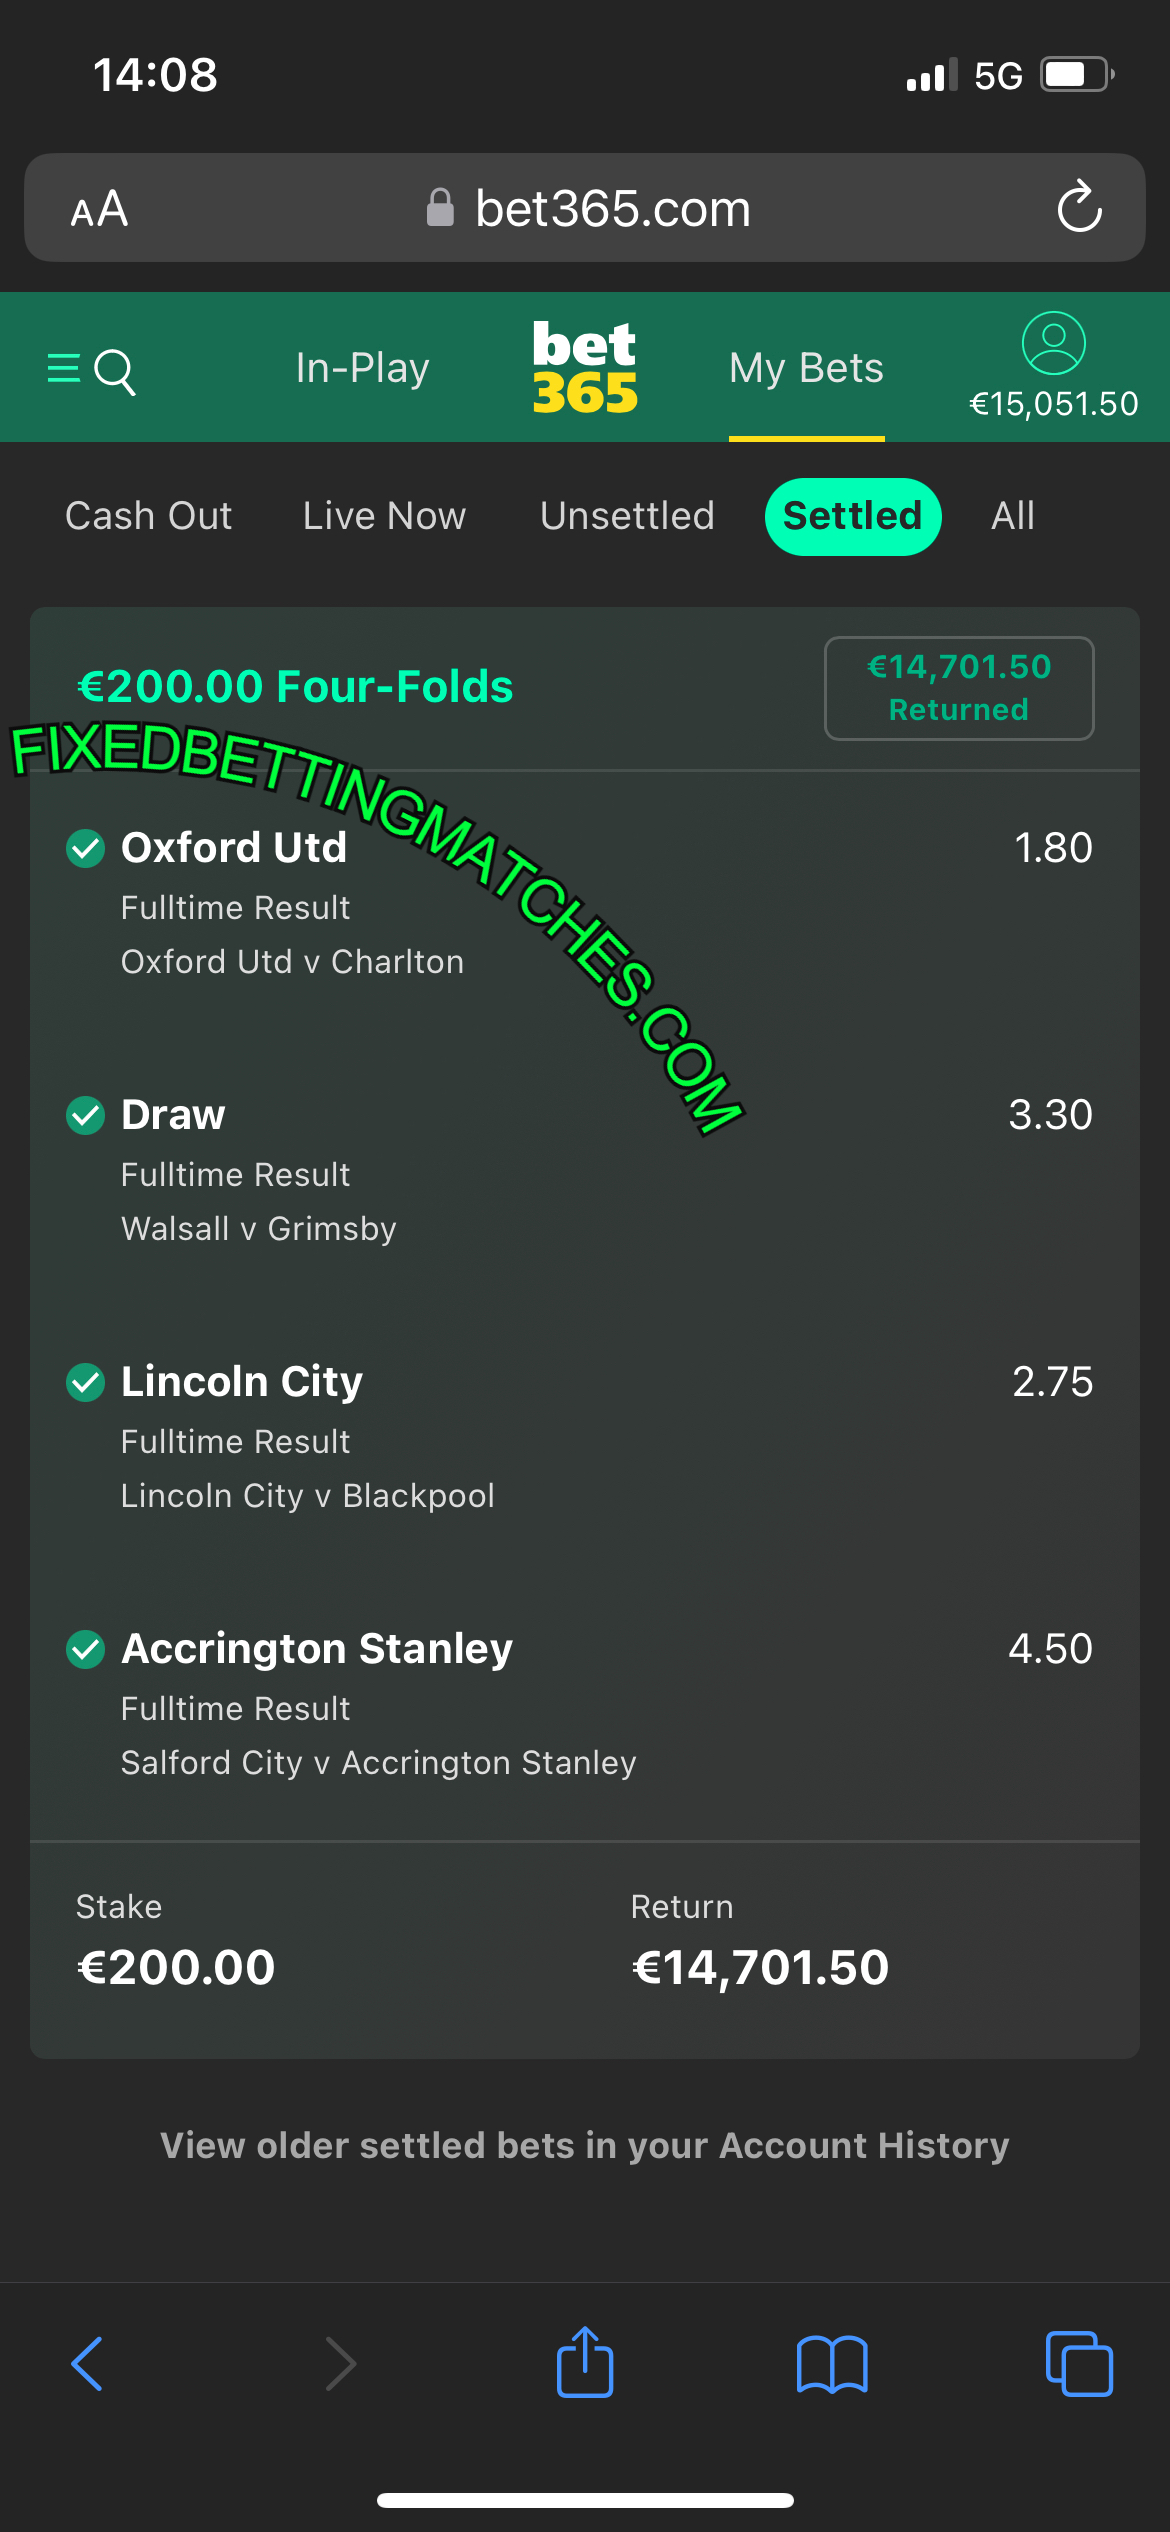 BETTING FIXED MATCHES 1X2 - FOOTBALL SURE WIN